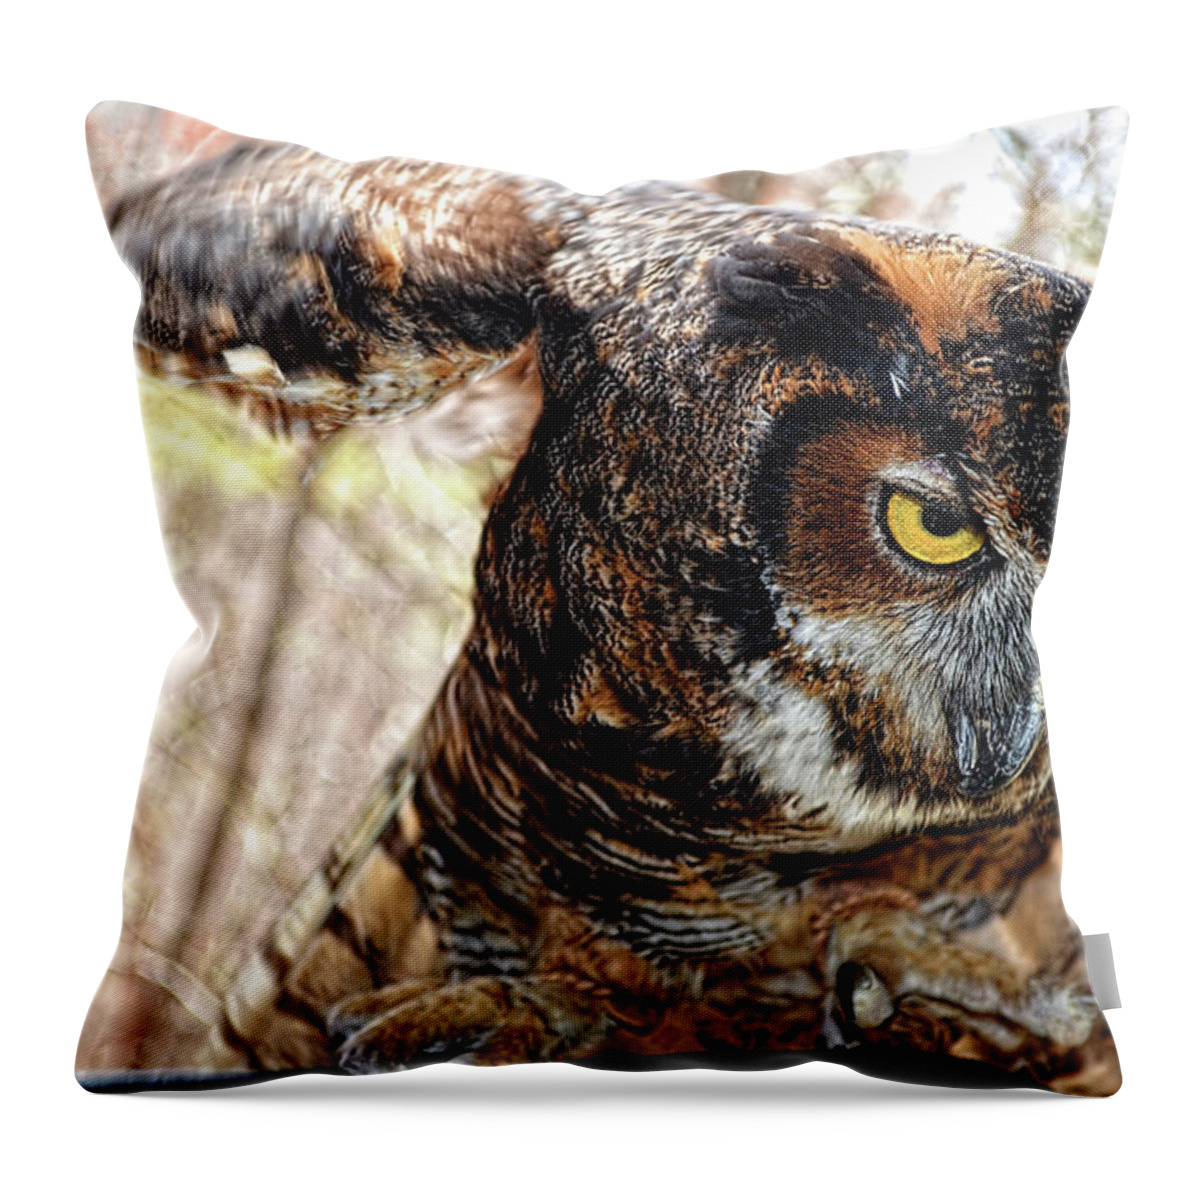 Owl Throw Pillow featuring the photograph Target Acquired by Jason Bohannon